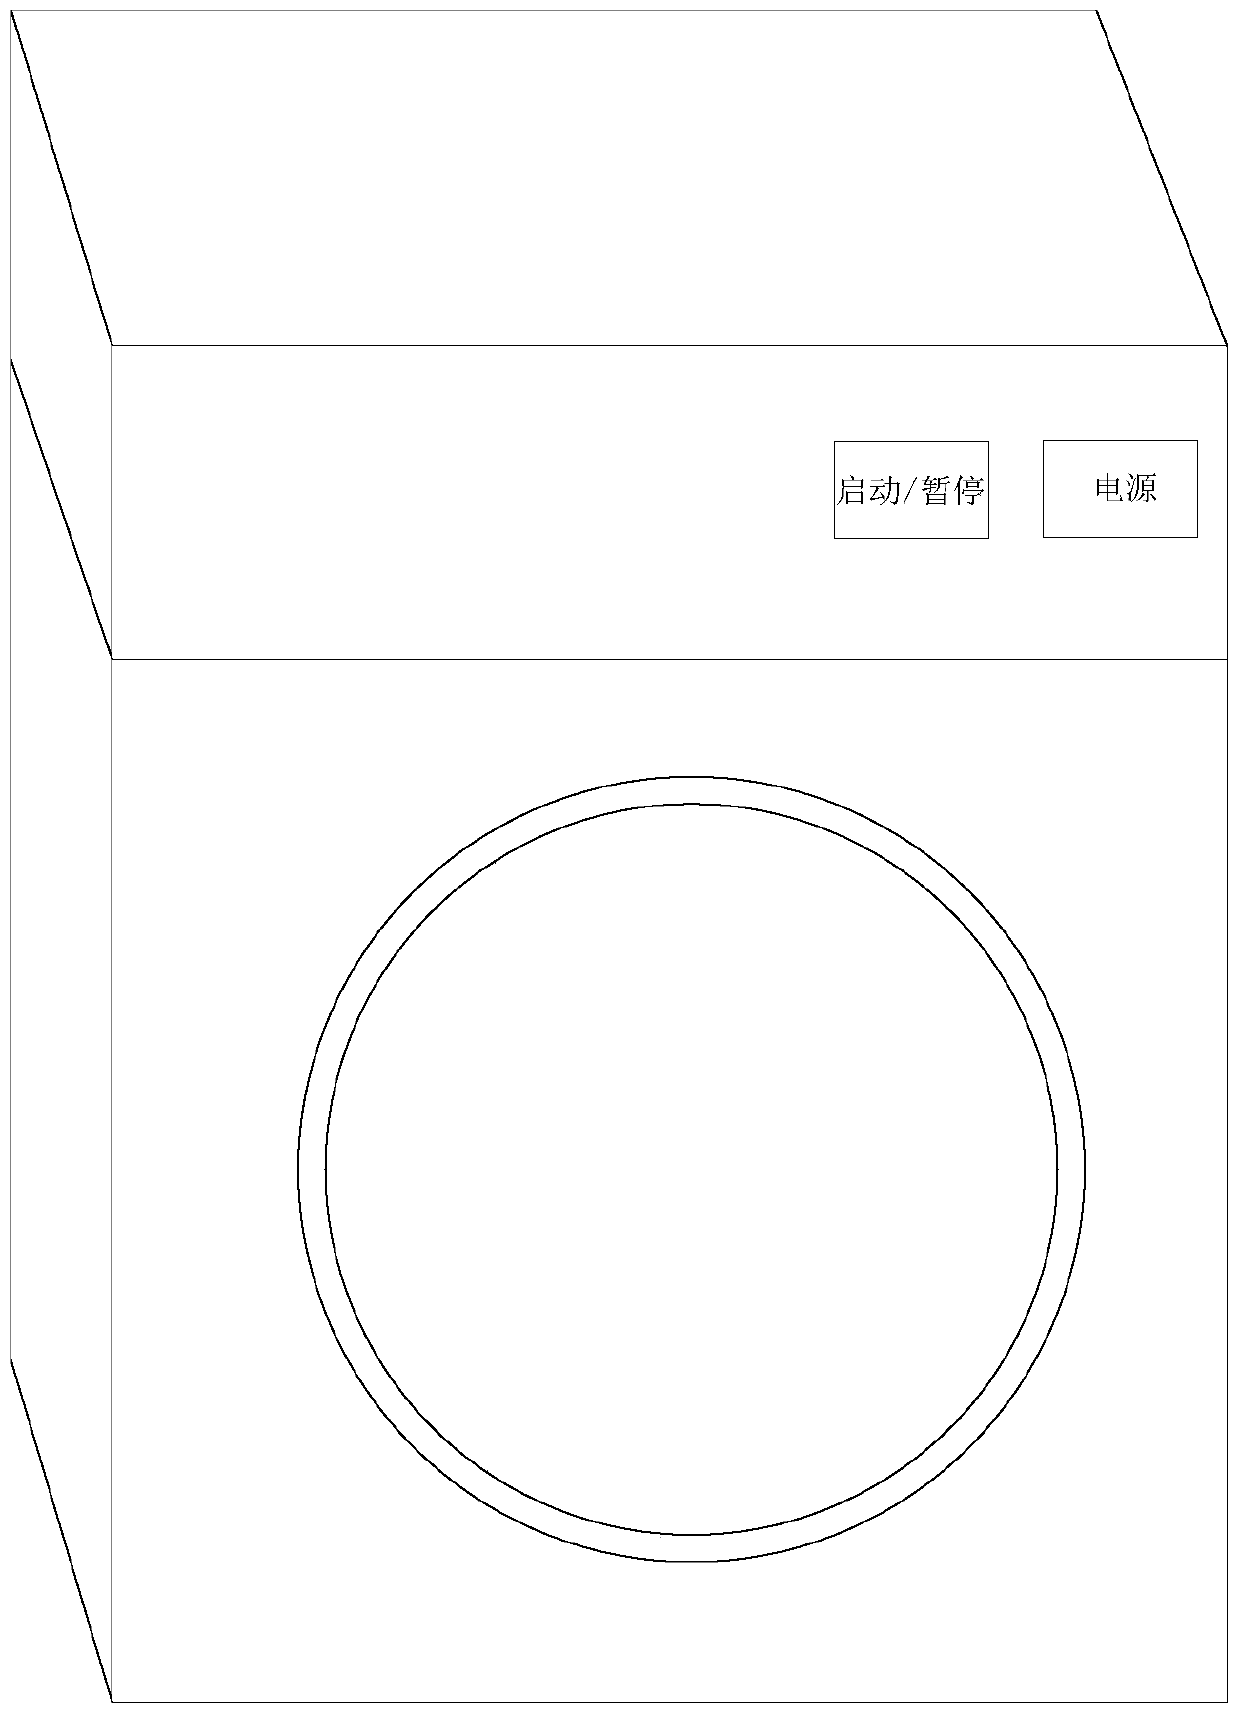 A washing machine and its control method